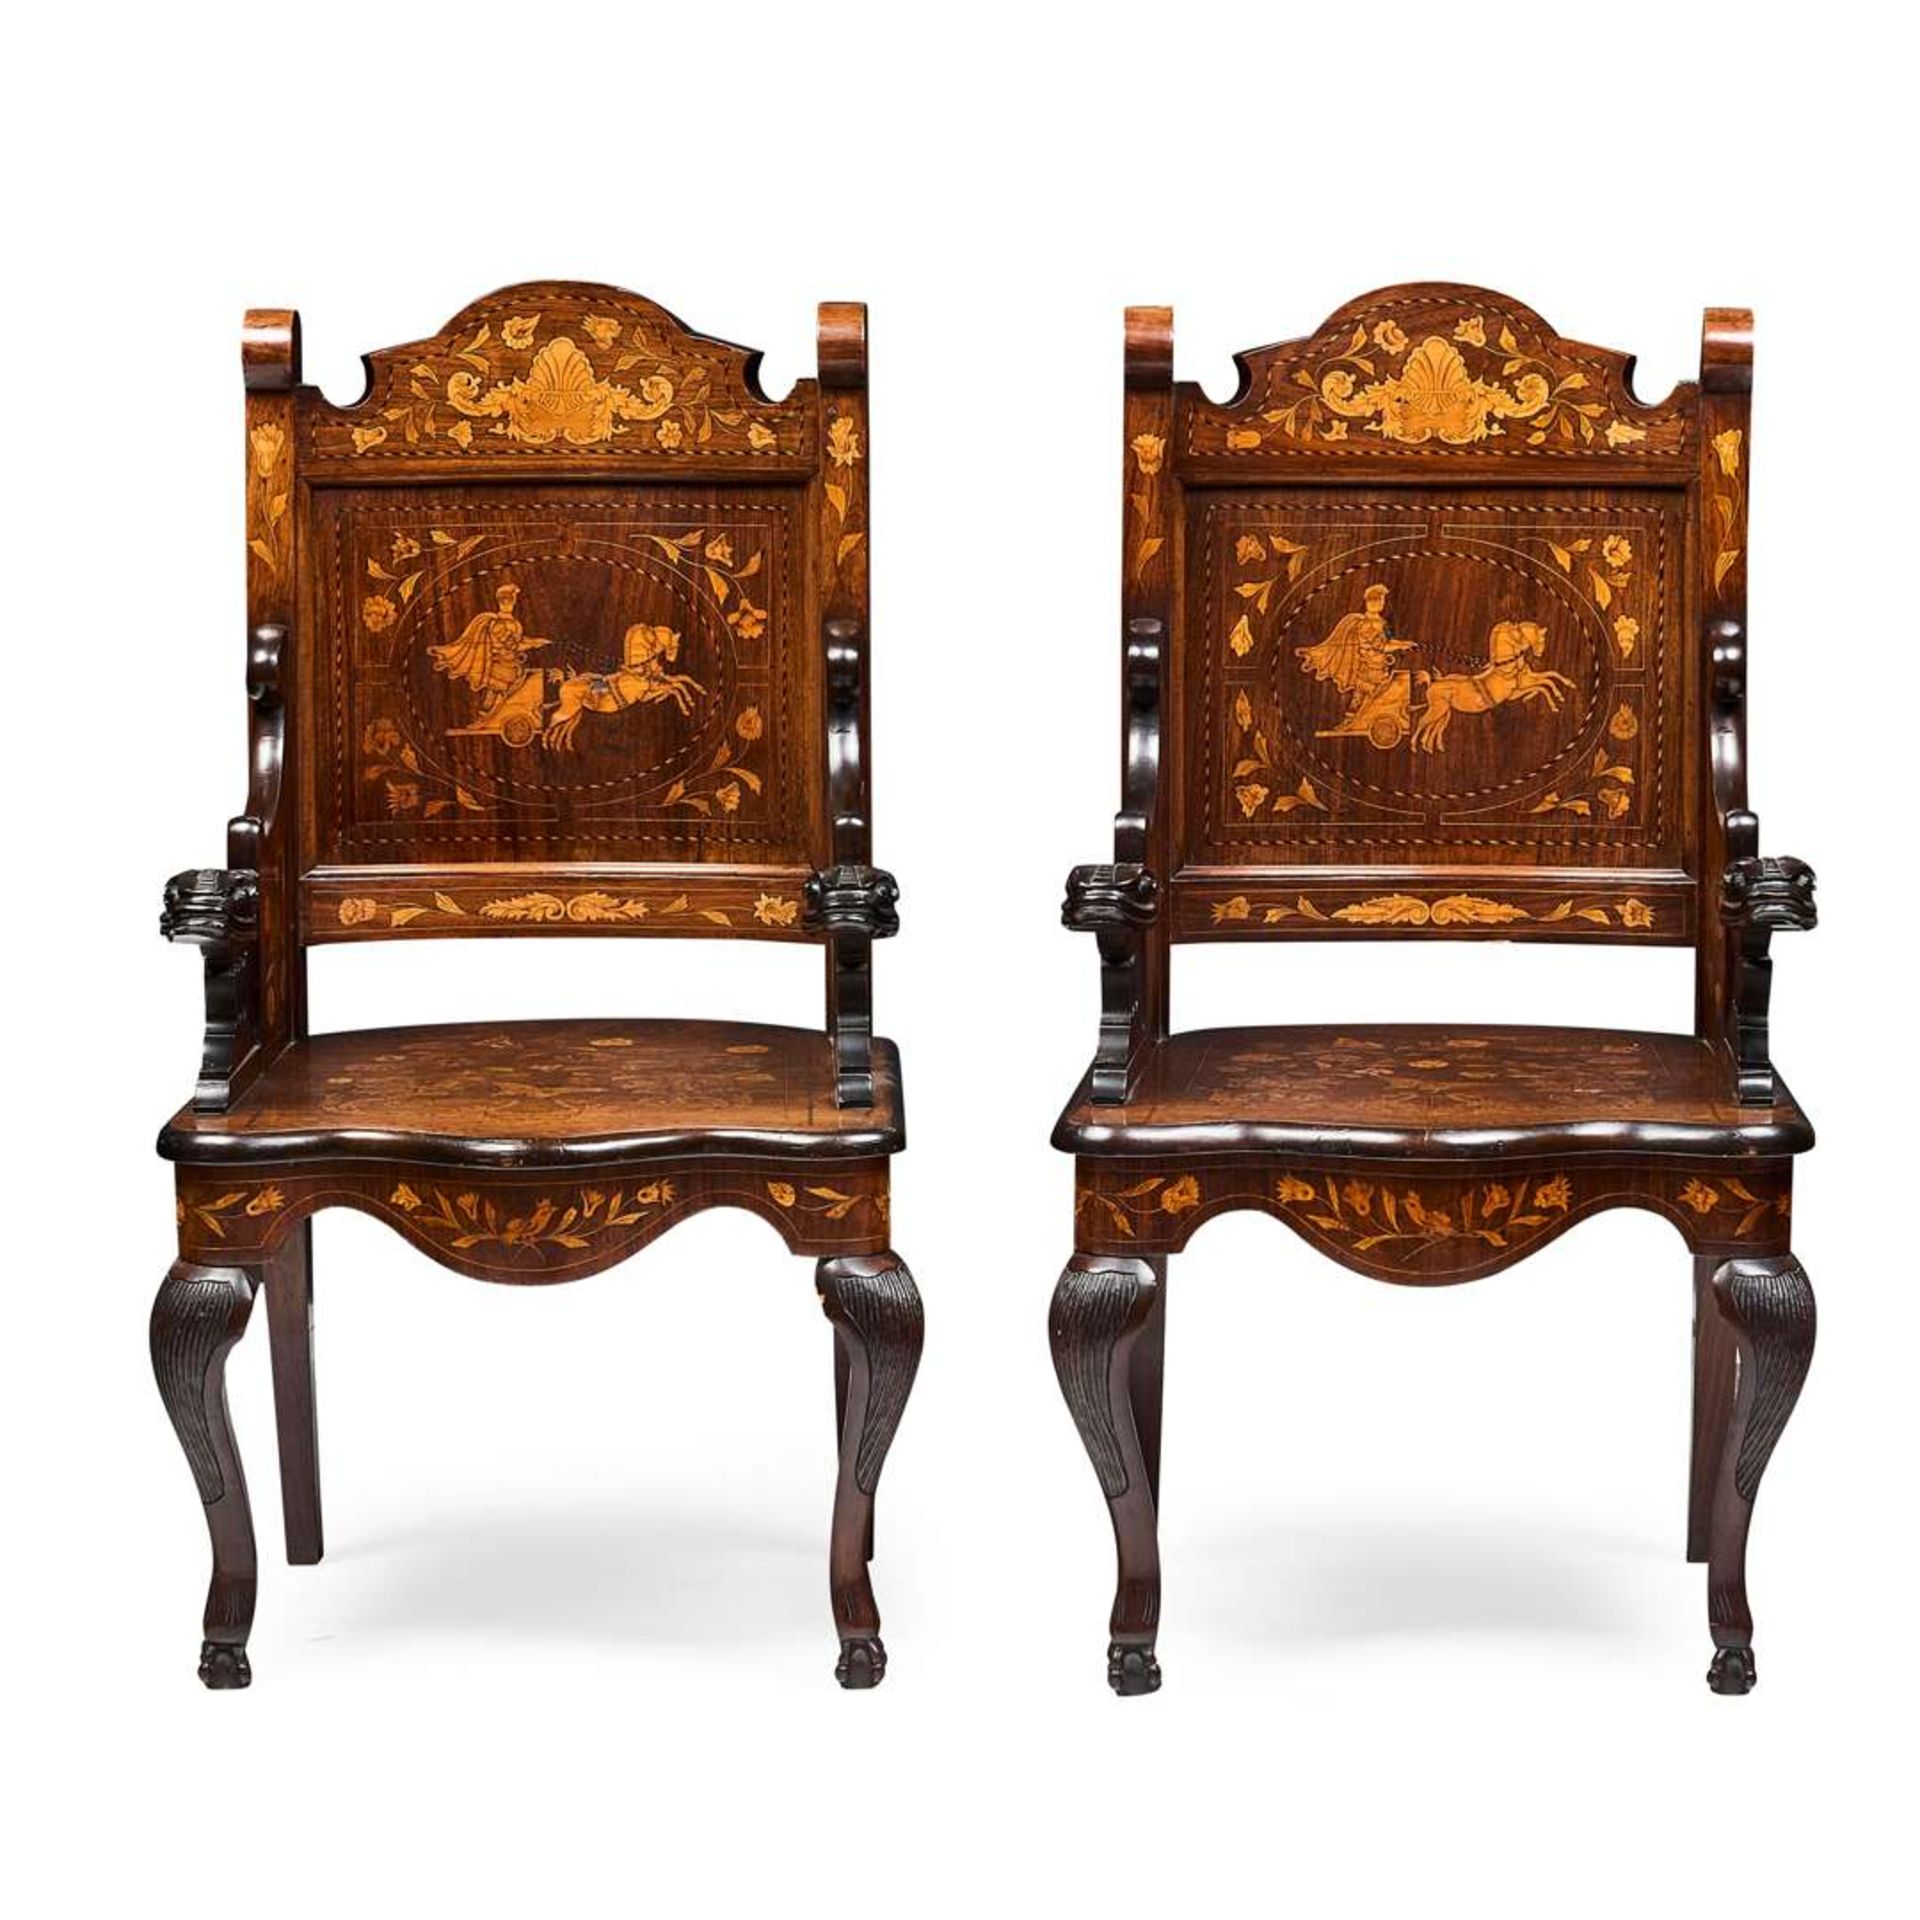 PAIR OF DUTCH WALNUT AND MARQUETRY ARMCHAIRS - Image 3 of 3